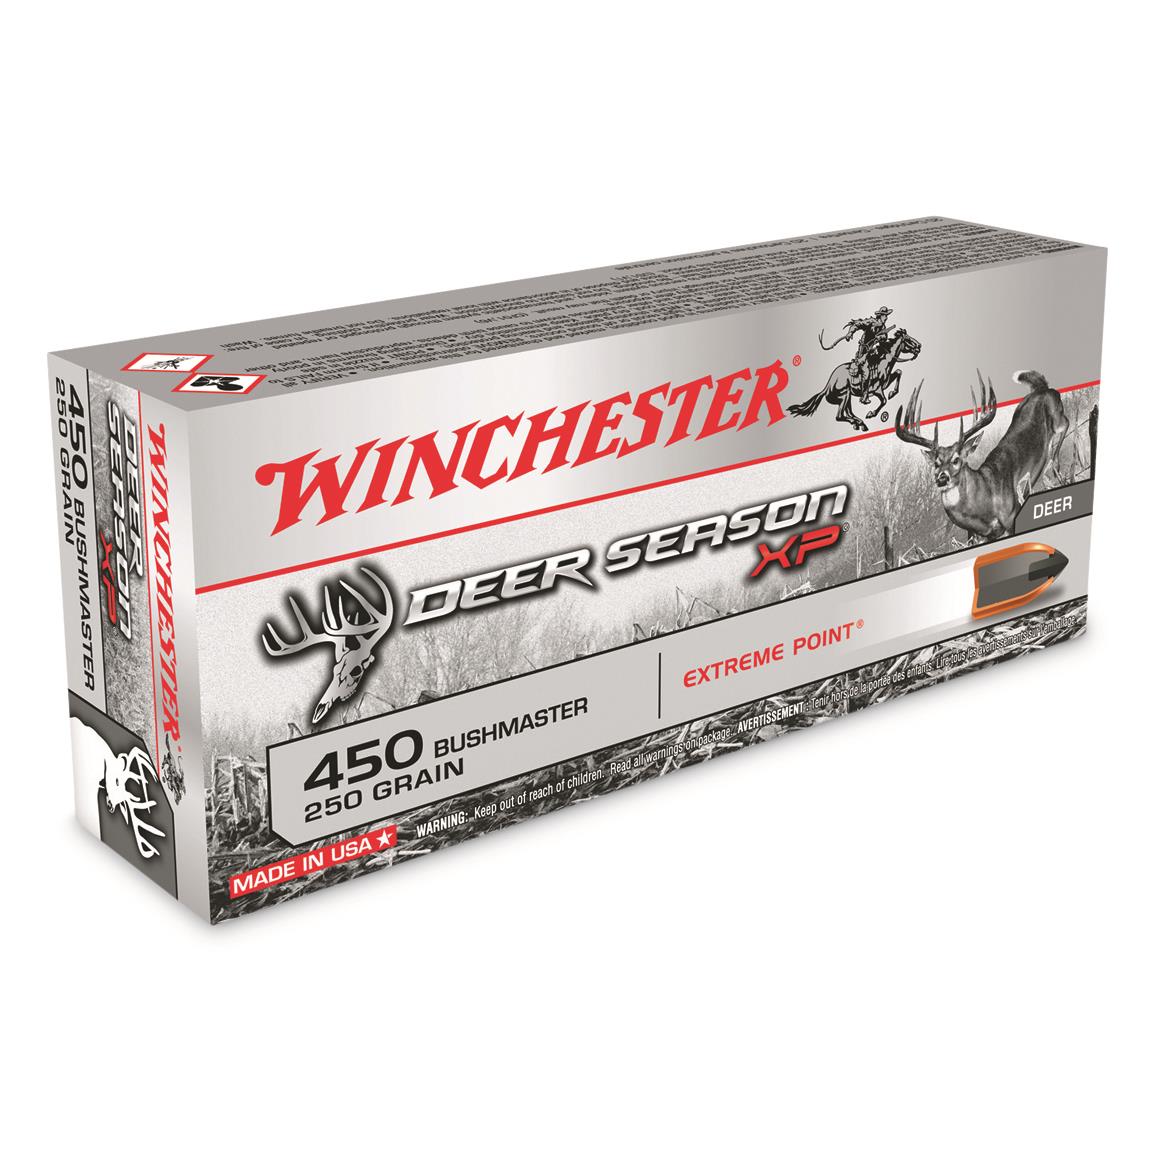 Winchester Deer Season XP, .450 Bushmaster, Polymer-Tipped Extreme Point, 250 Grain, 20 Rounds